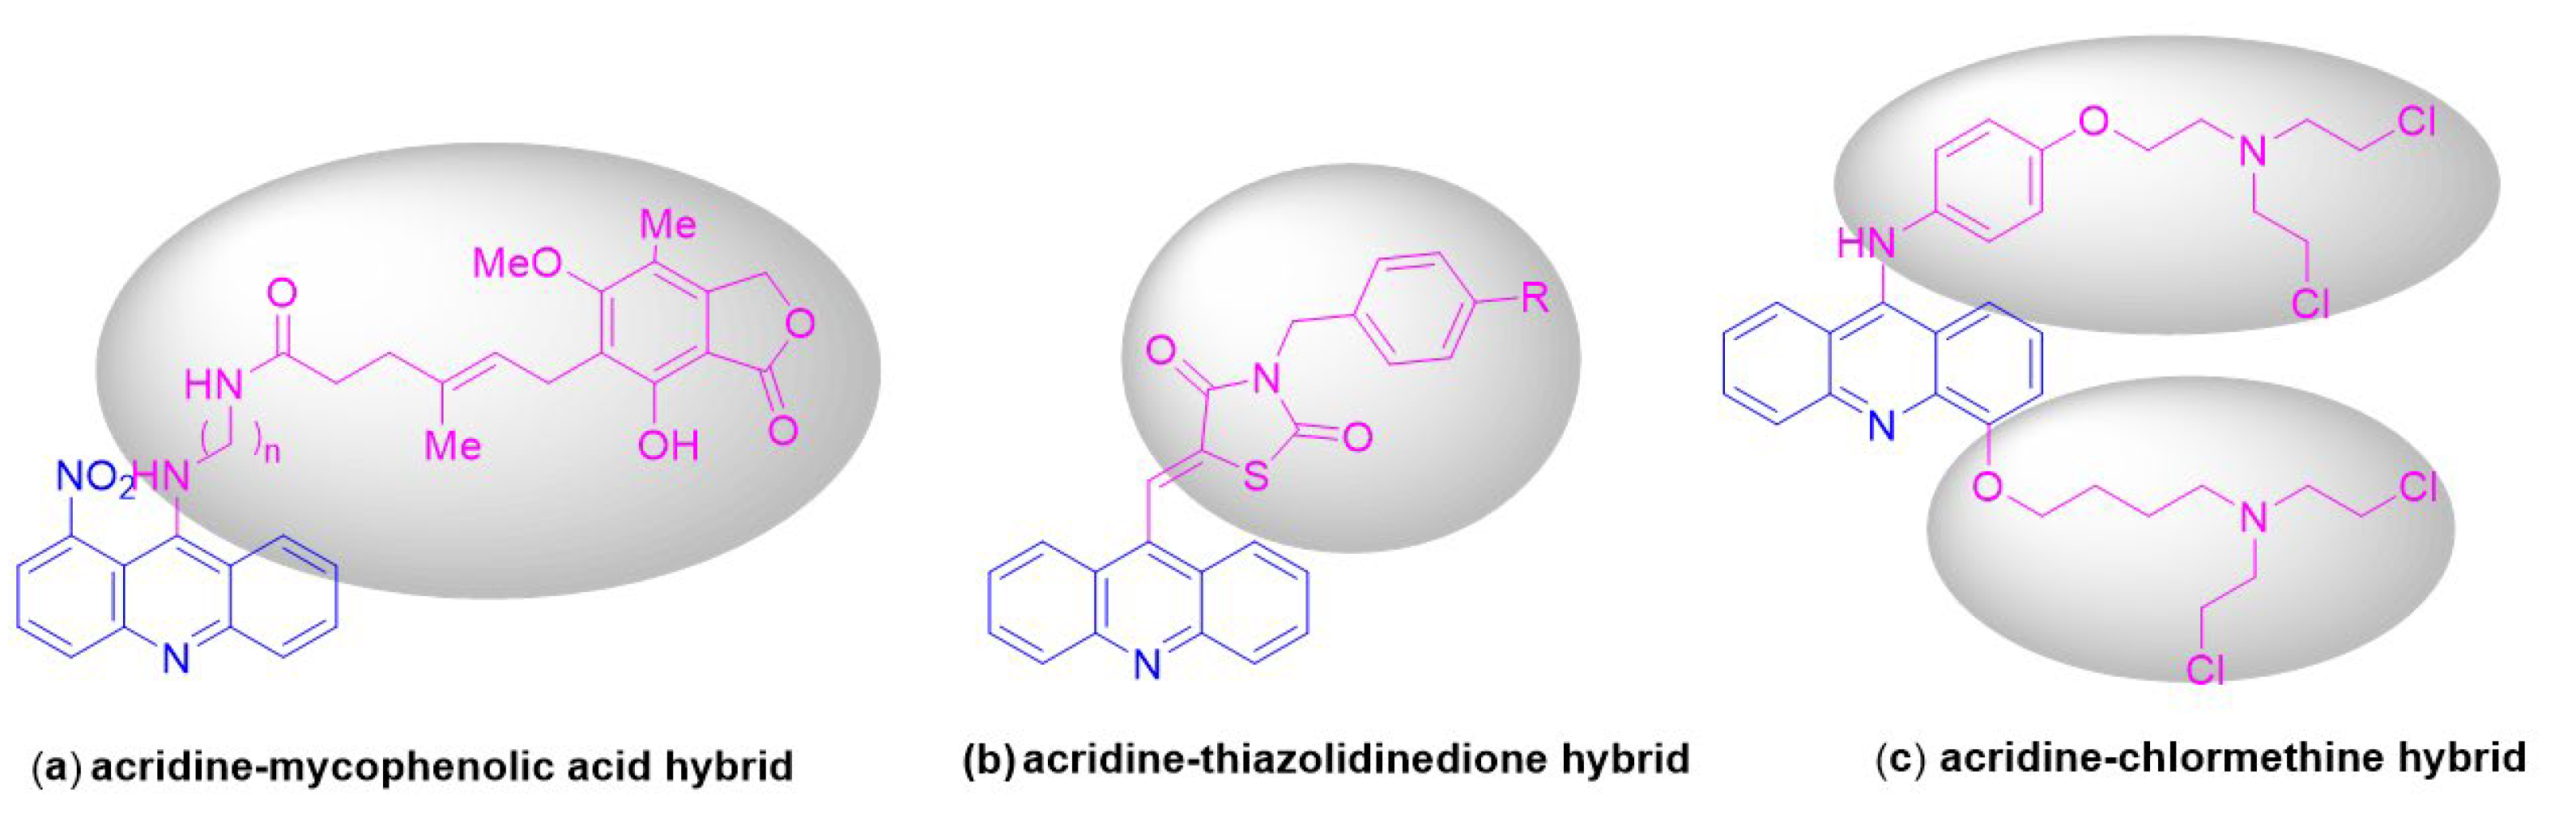 IJMS | Free Full-Text | Design and of Acridine-Triazole and Acridine-Thiadiazole Derivatives and Their Inhibitory against Cancer Cells